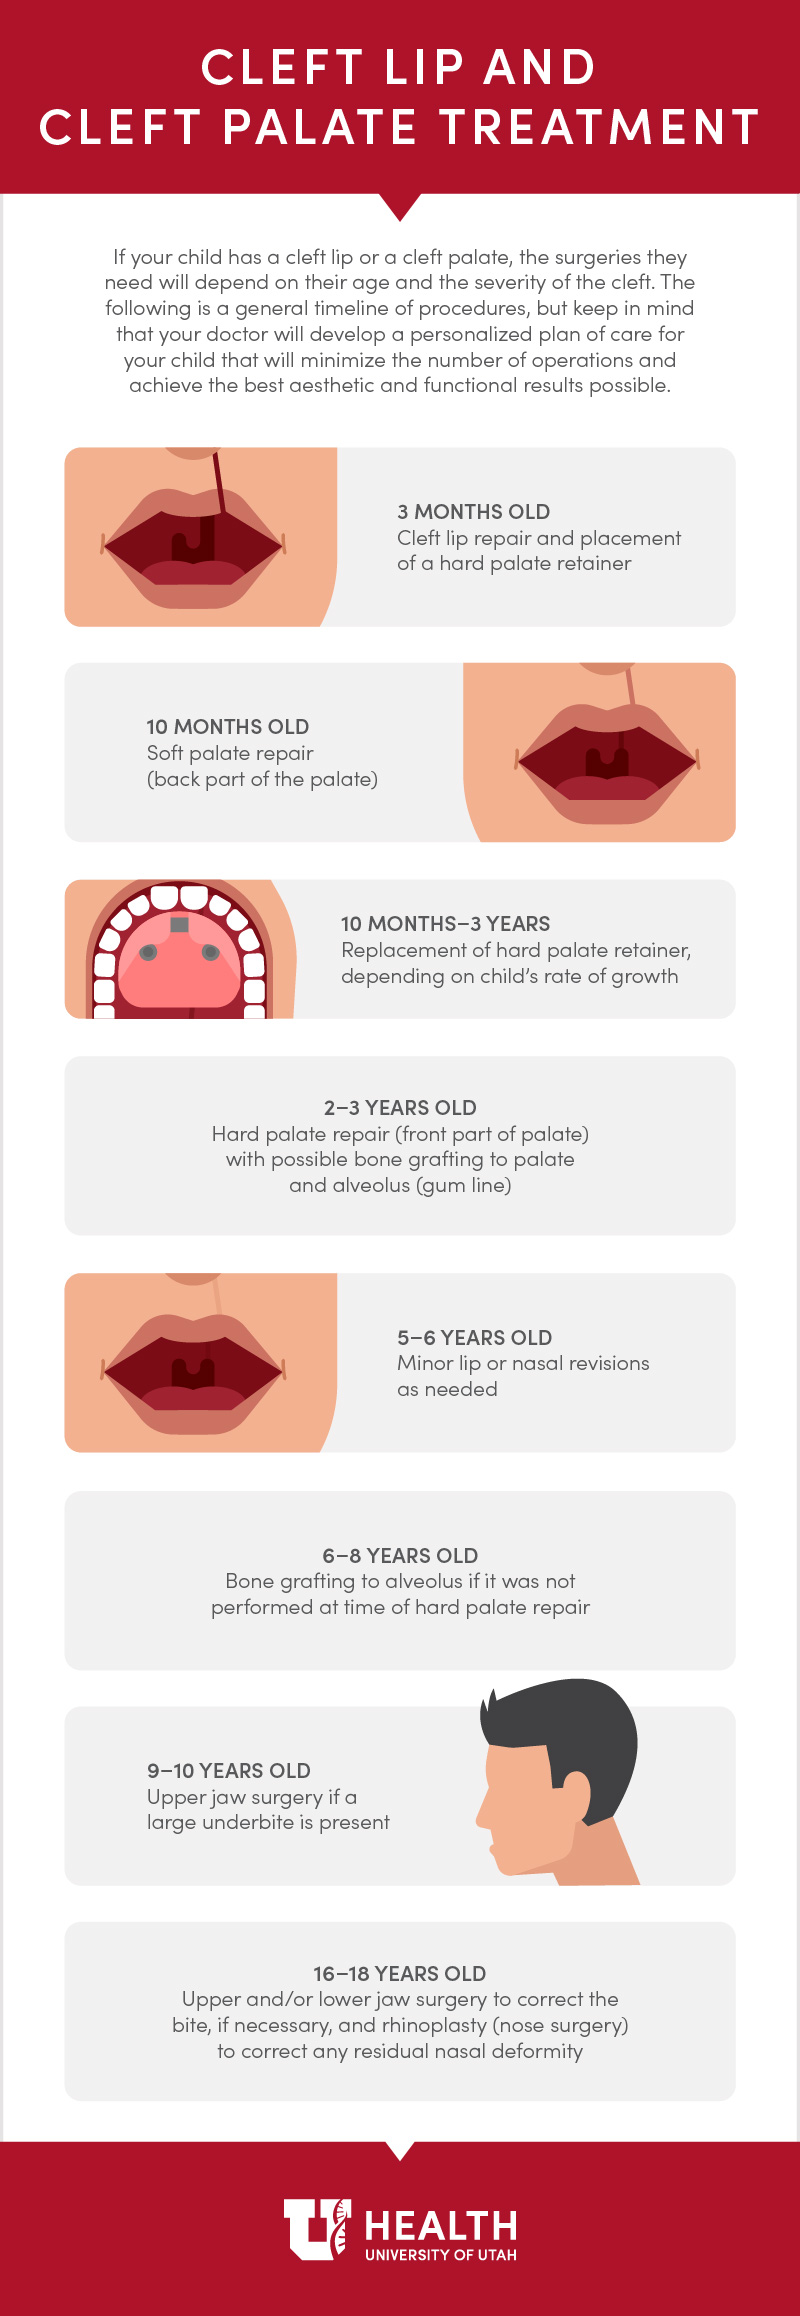 cleft lip and cleft treatment infographic